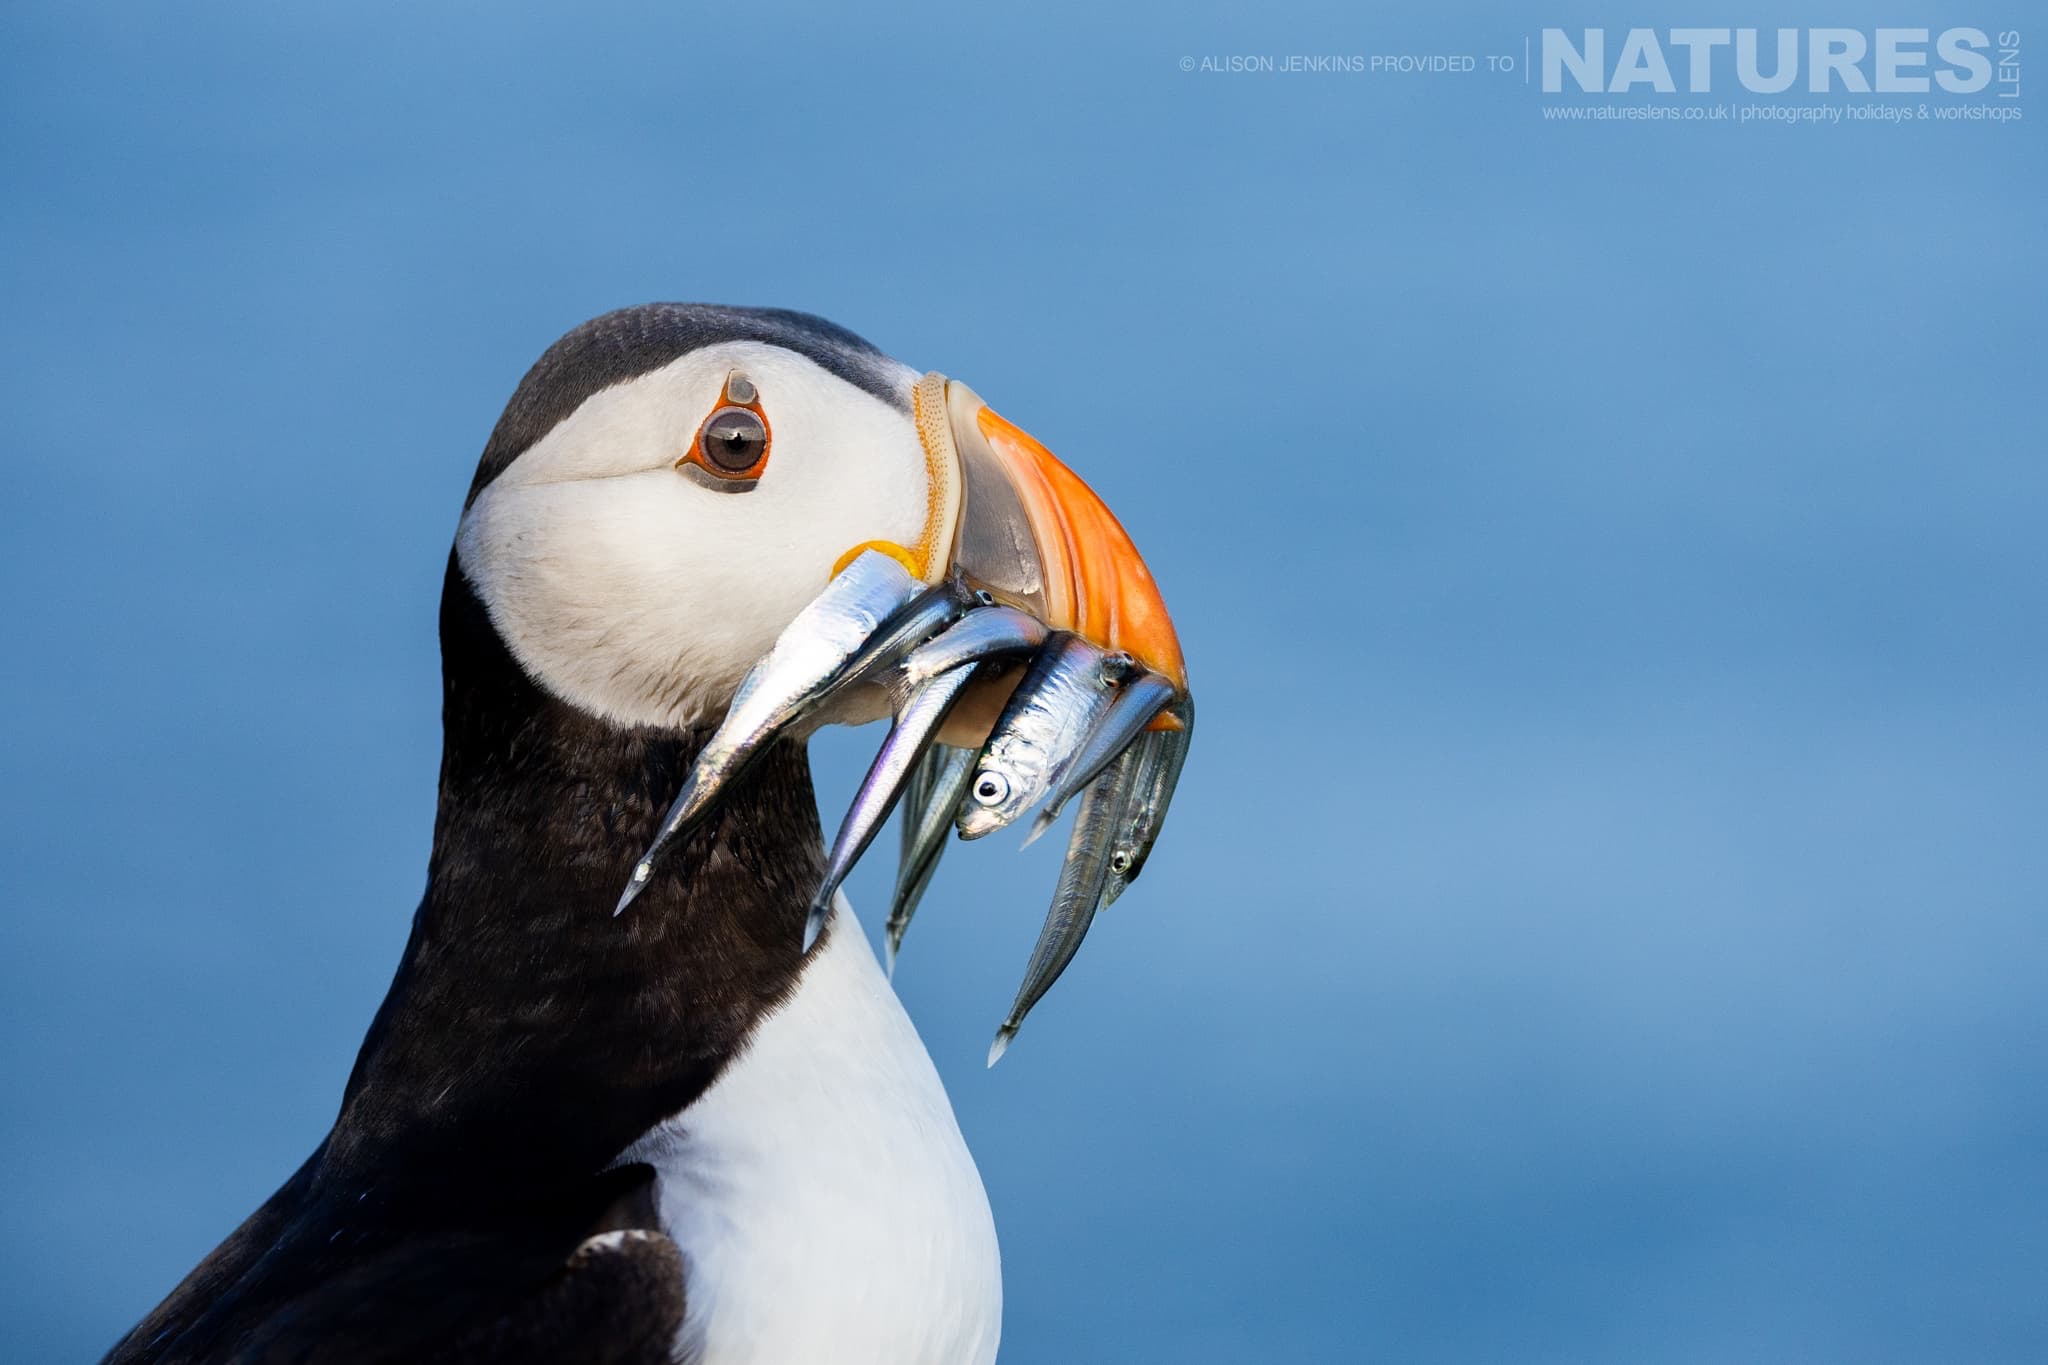 A Profile Image Of One Of The Puffins Of Skomer With A Beak Full Of Sand Eels